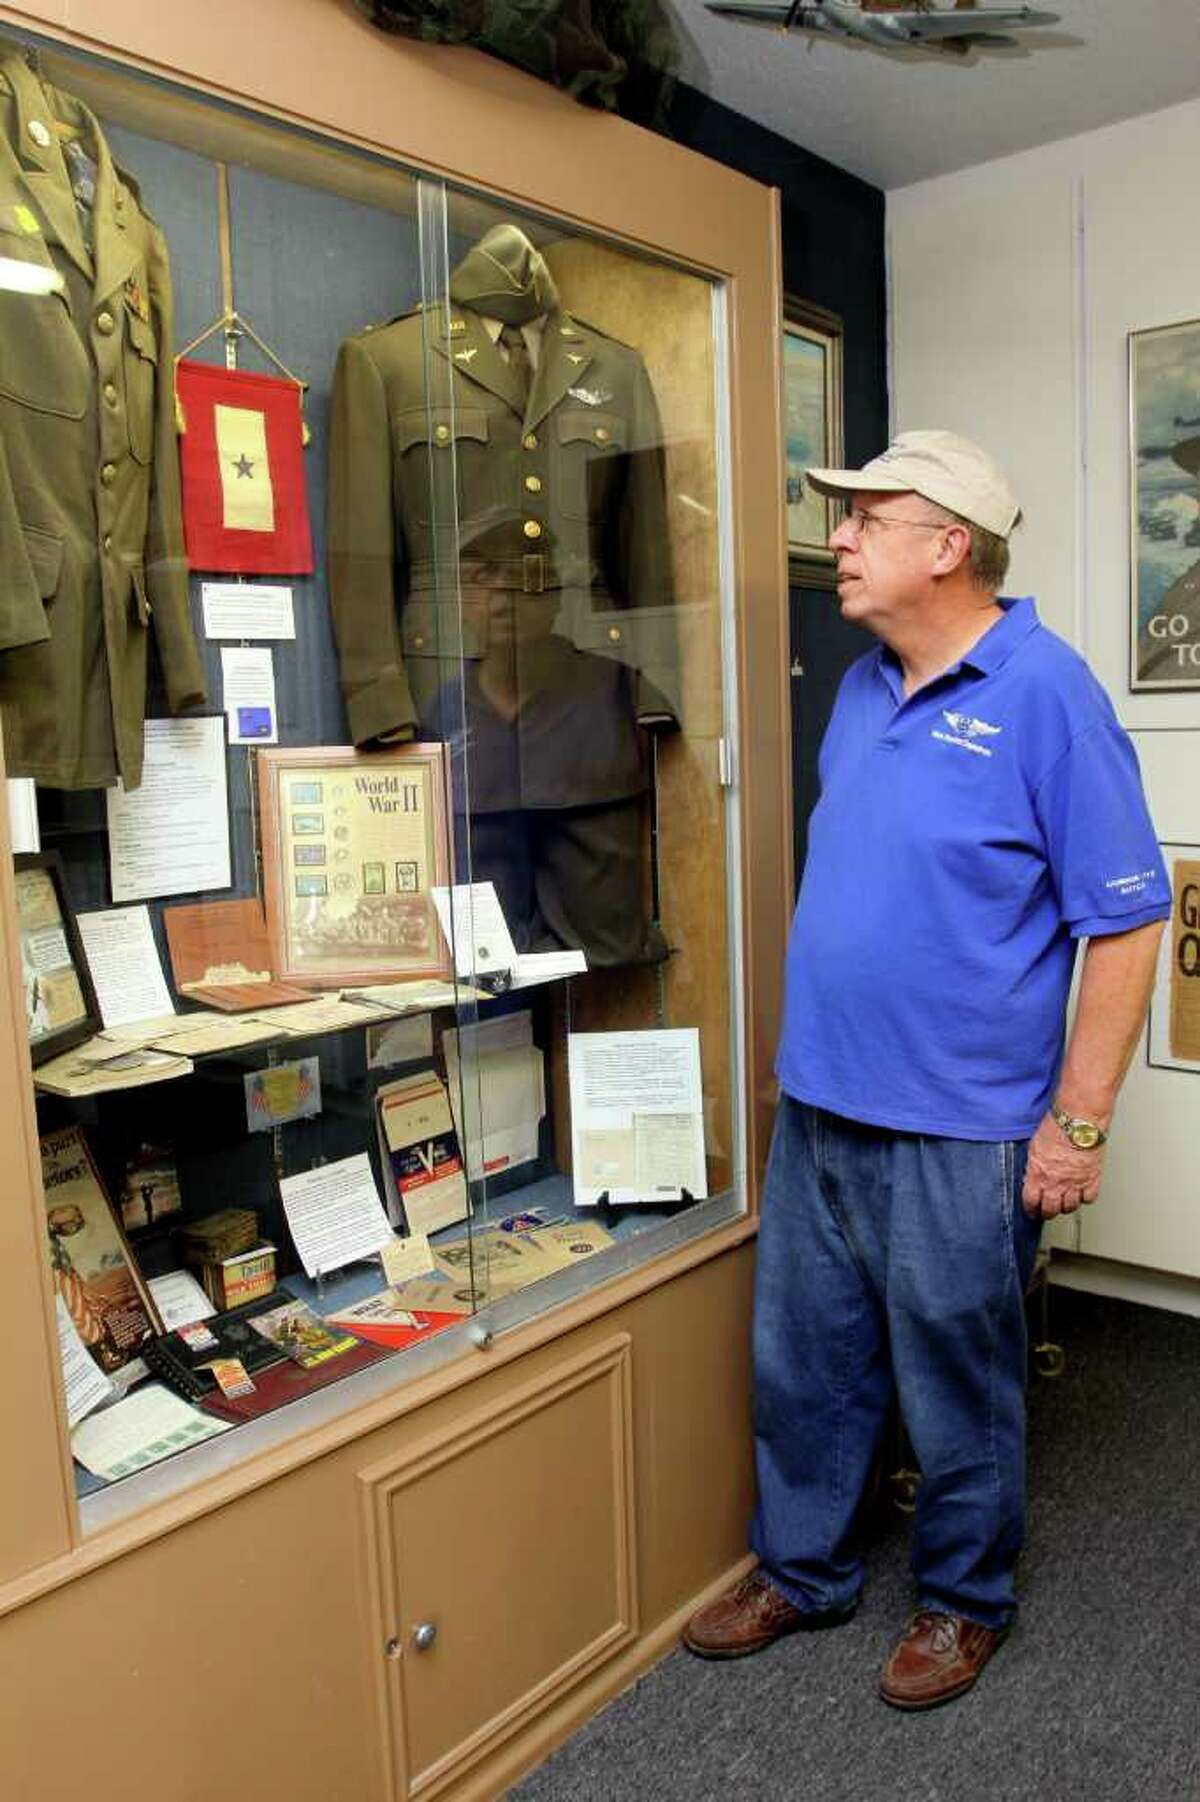 RELICS THAT TELL STORIES: Commemorative Air Force member, Sam Hoynes examines a World War II display case inside the group's museum. The case includes rationing stamps, coins. uniforms and civil defense bonds.